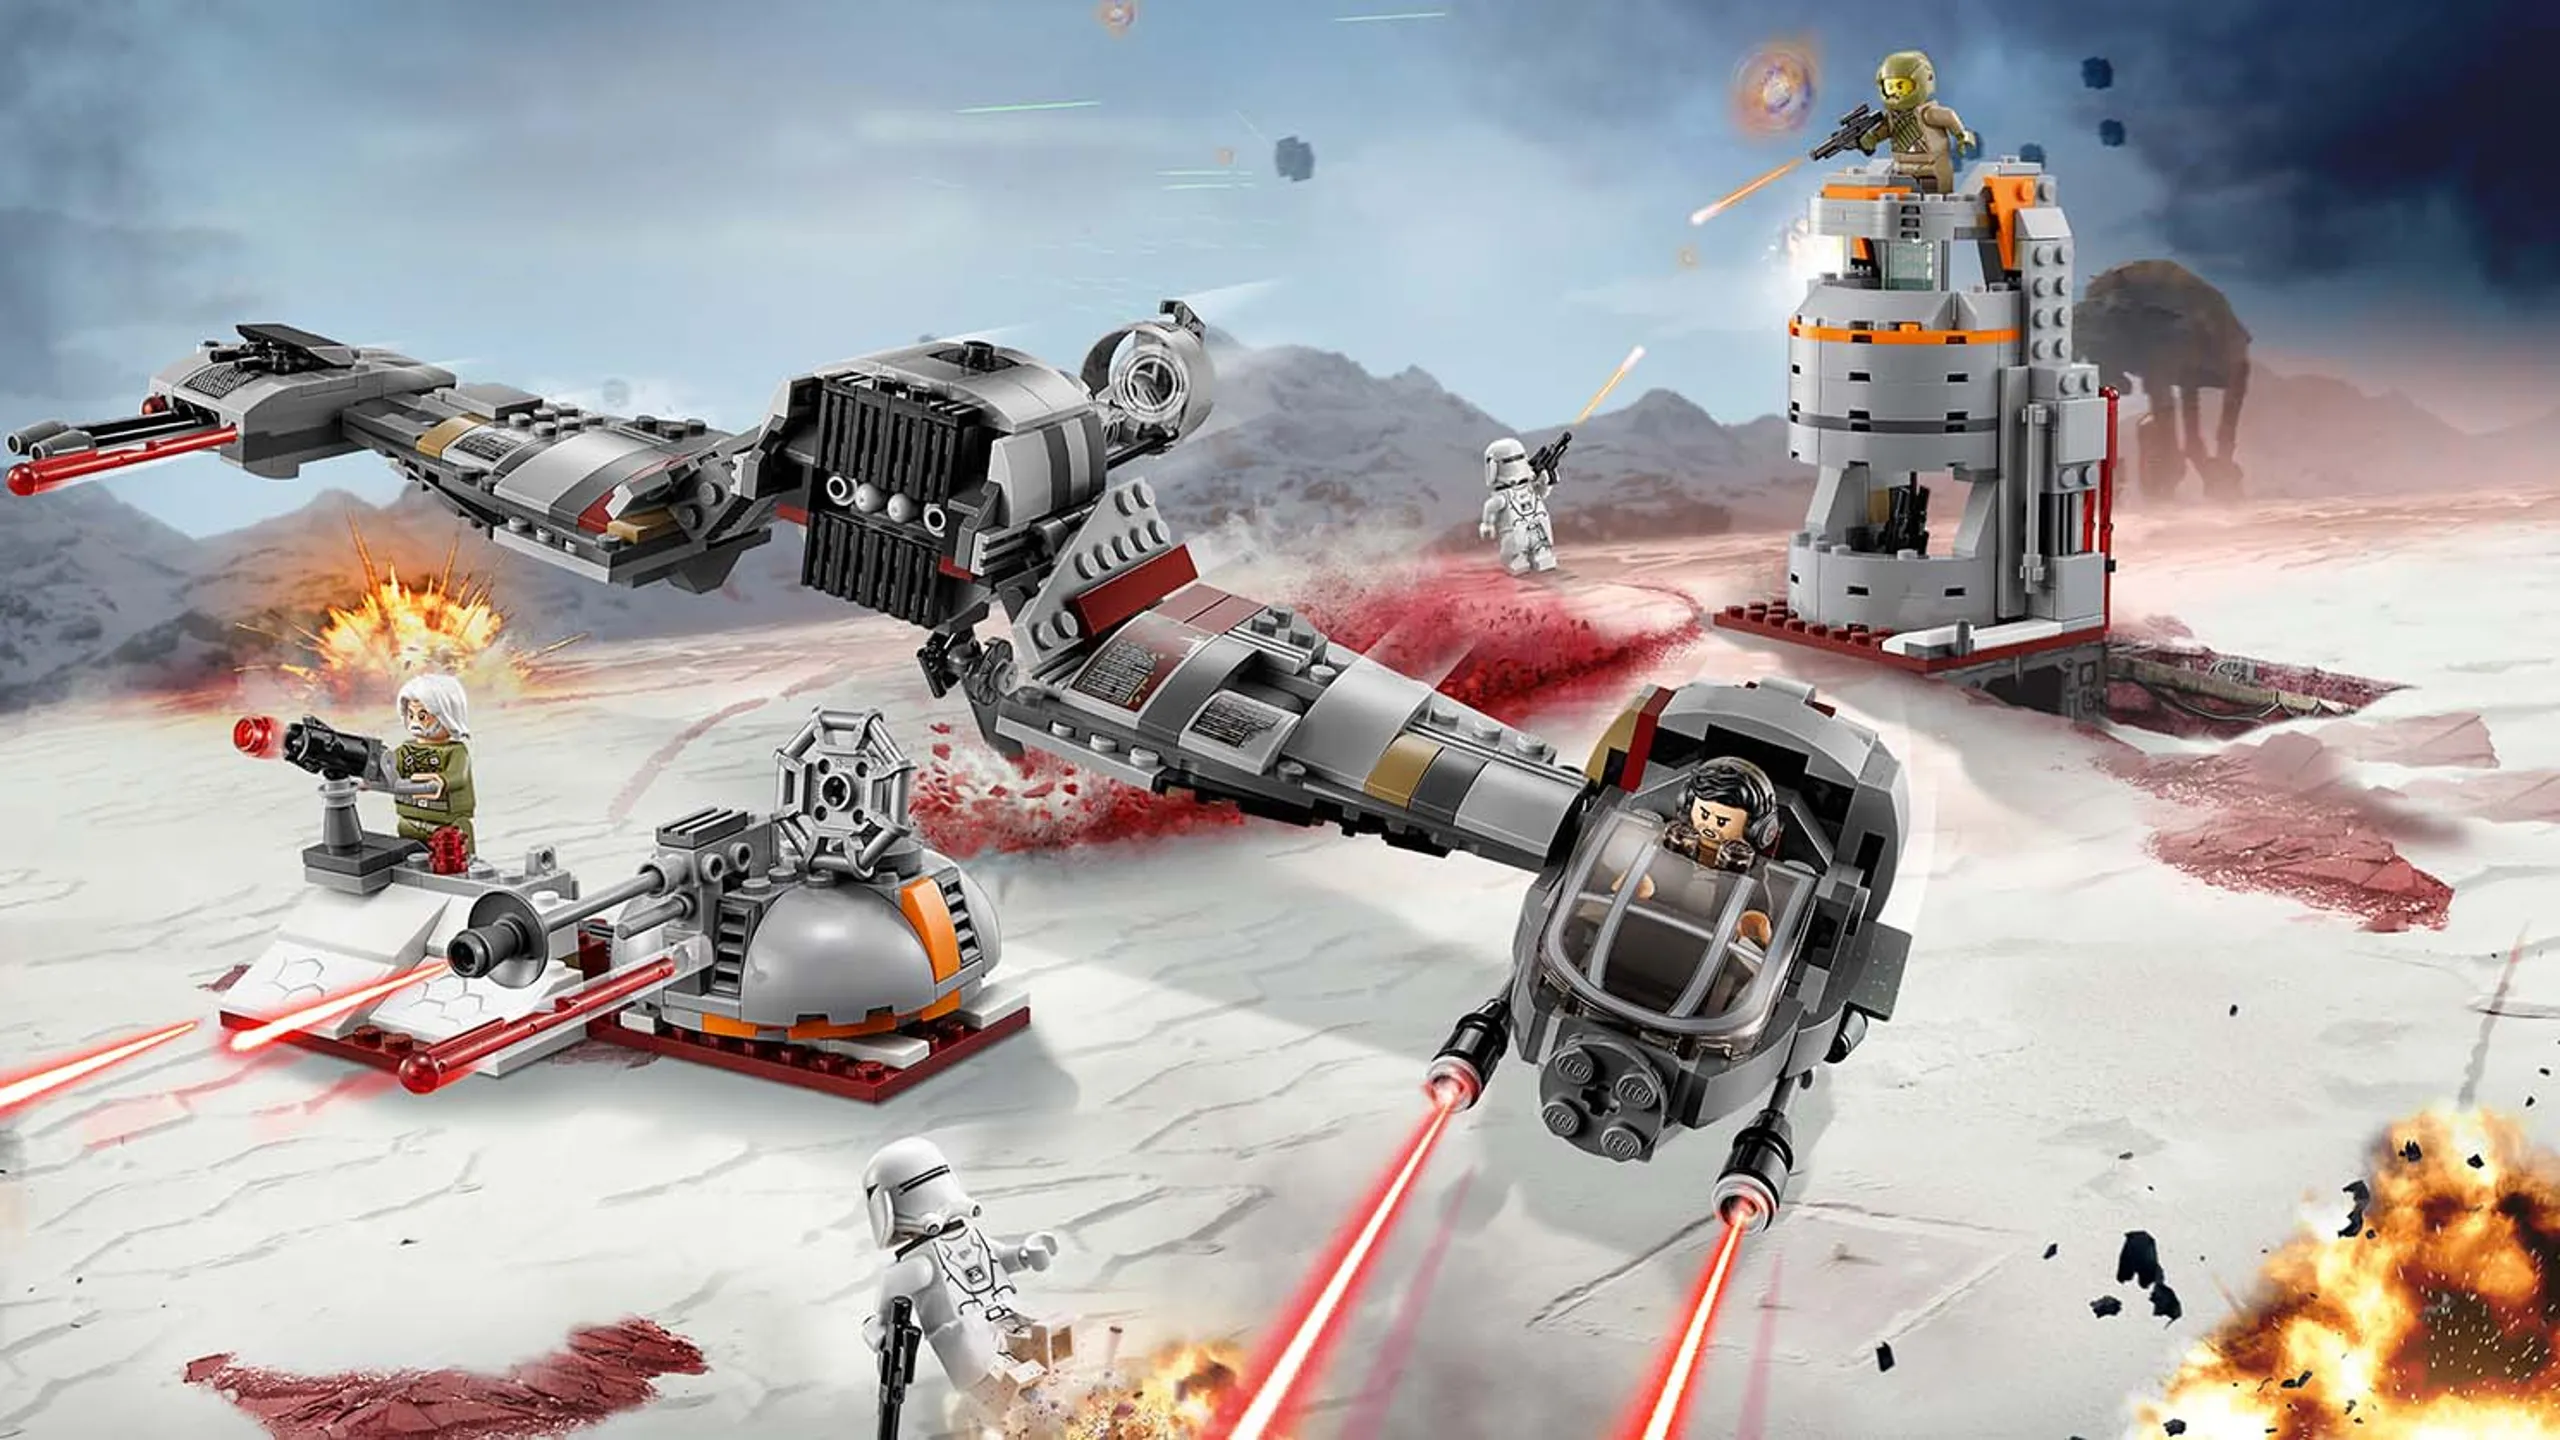 LEGO Star Wars Defense of Crait™ - 75202 - The Resistance Ski Speeder is in battle against the First Order at the Resistance base.